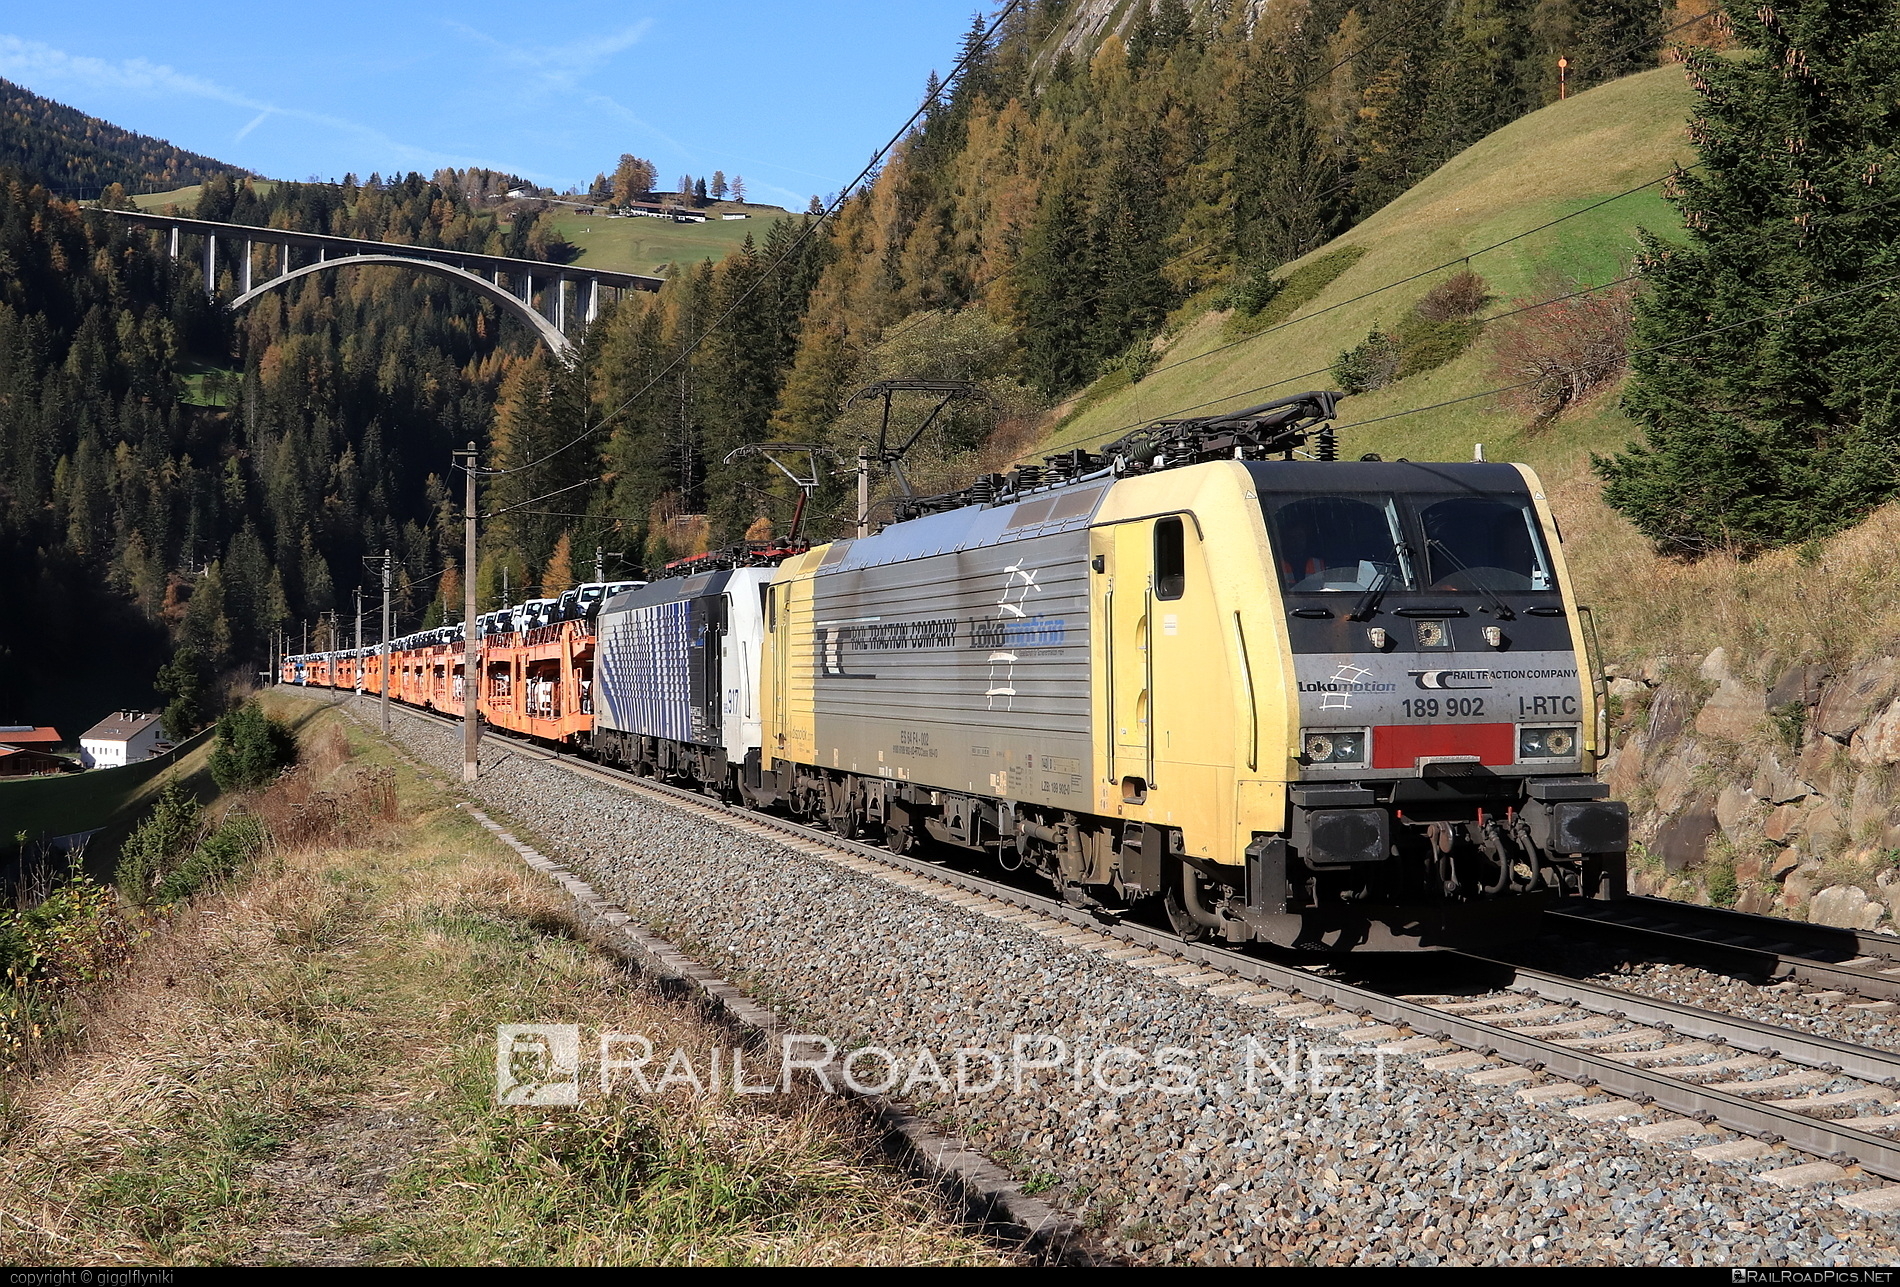 Siemens ES 64 F4 - 189 902 operated by Rail Traction Company #RailTractionCompany #carcarrierwagon #es64 #es64f4 #eurosprinter #rtc #siemens #siemensEs64 #siemensEs64f4